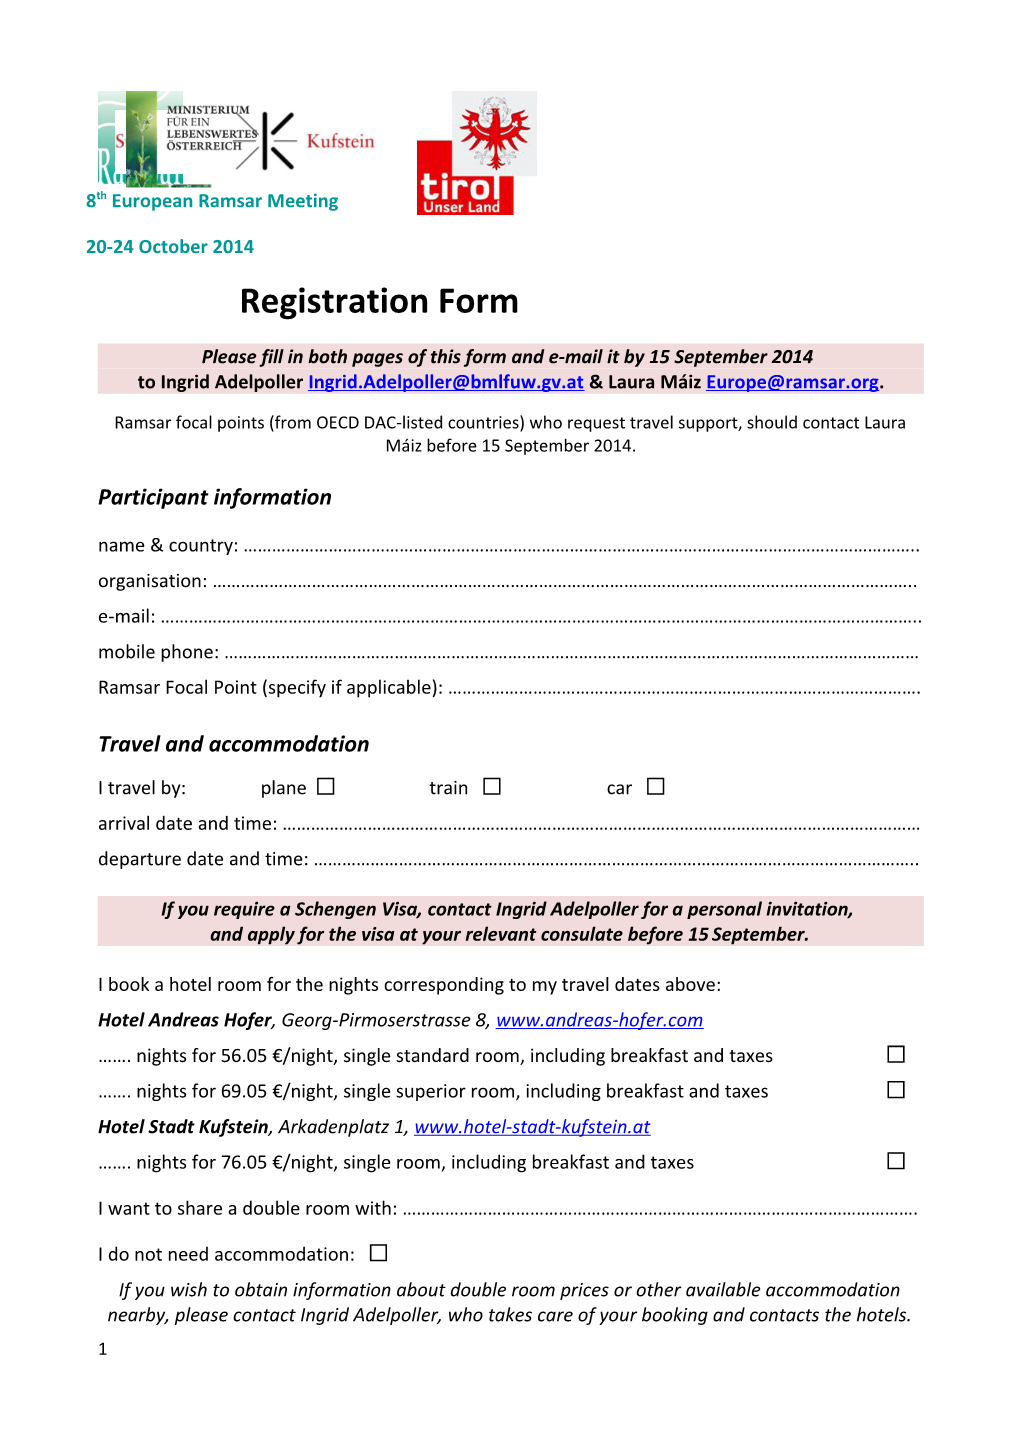 Please Fill in Both Pages of This Form and E-Mail It by 15 September 2014